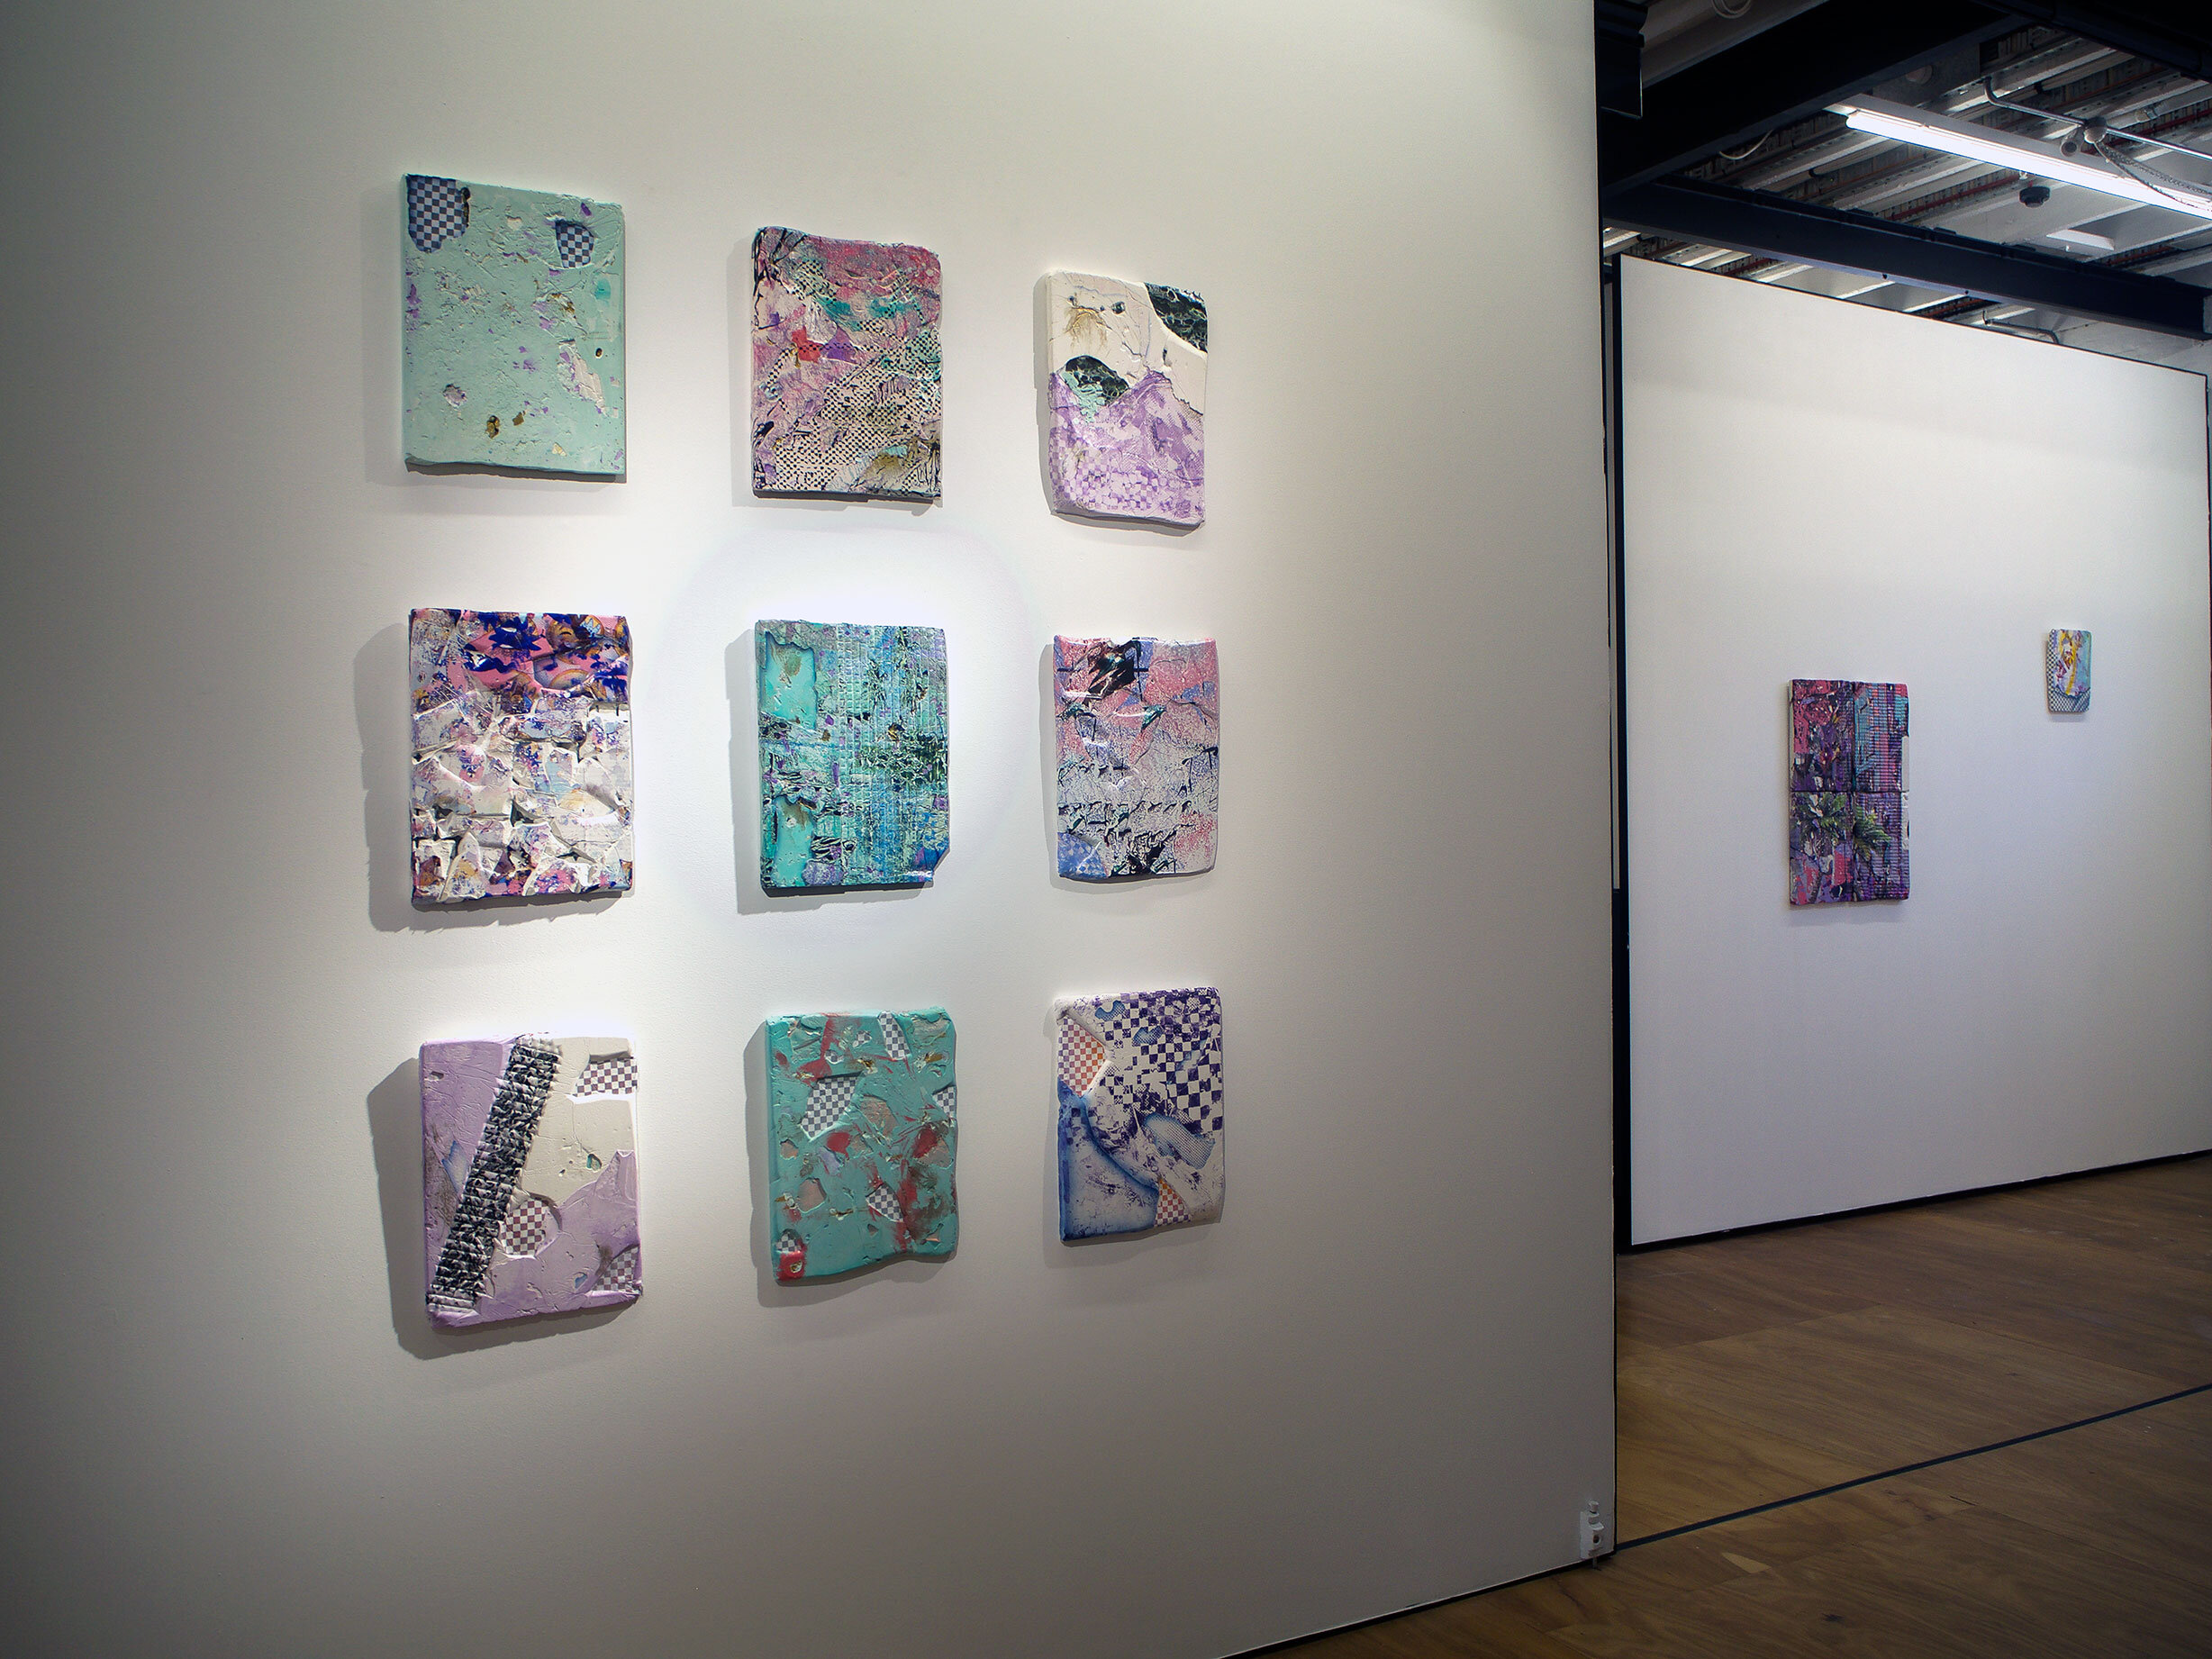   Fauxfacts  (installation view) 